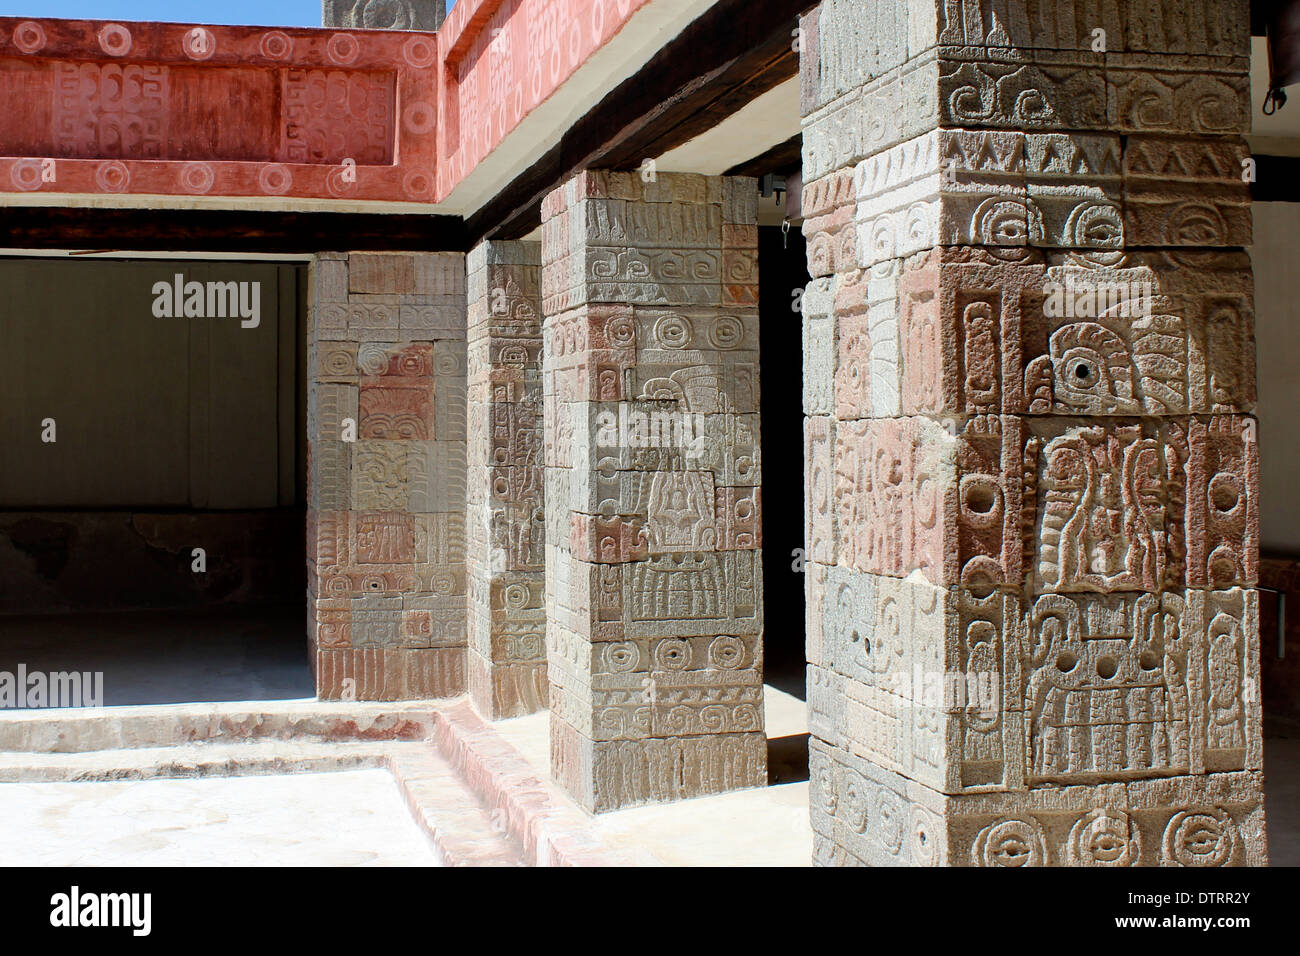 Pillars in the patio of the Palace of Quetzal-Papalotl, Teotihuacan Pyramids, Teotihuacan, Mexico - ancient Aztec site Stock Photo